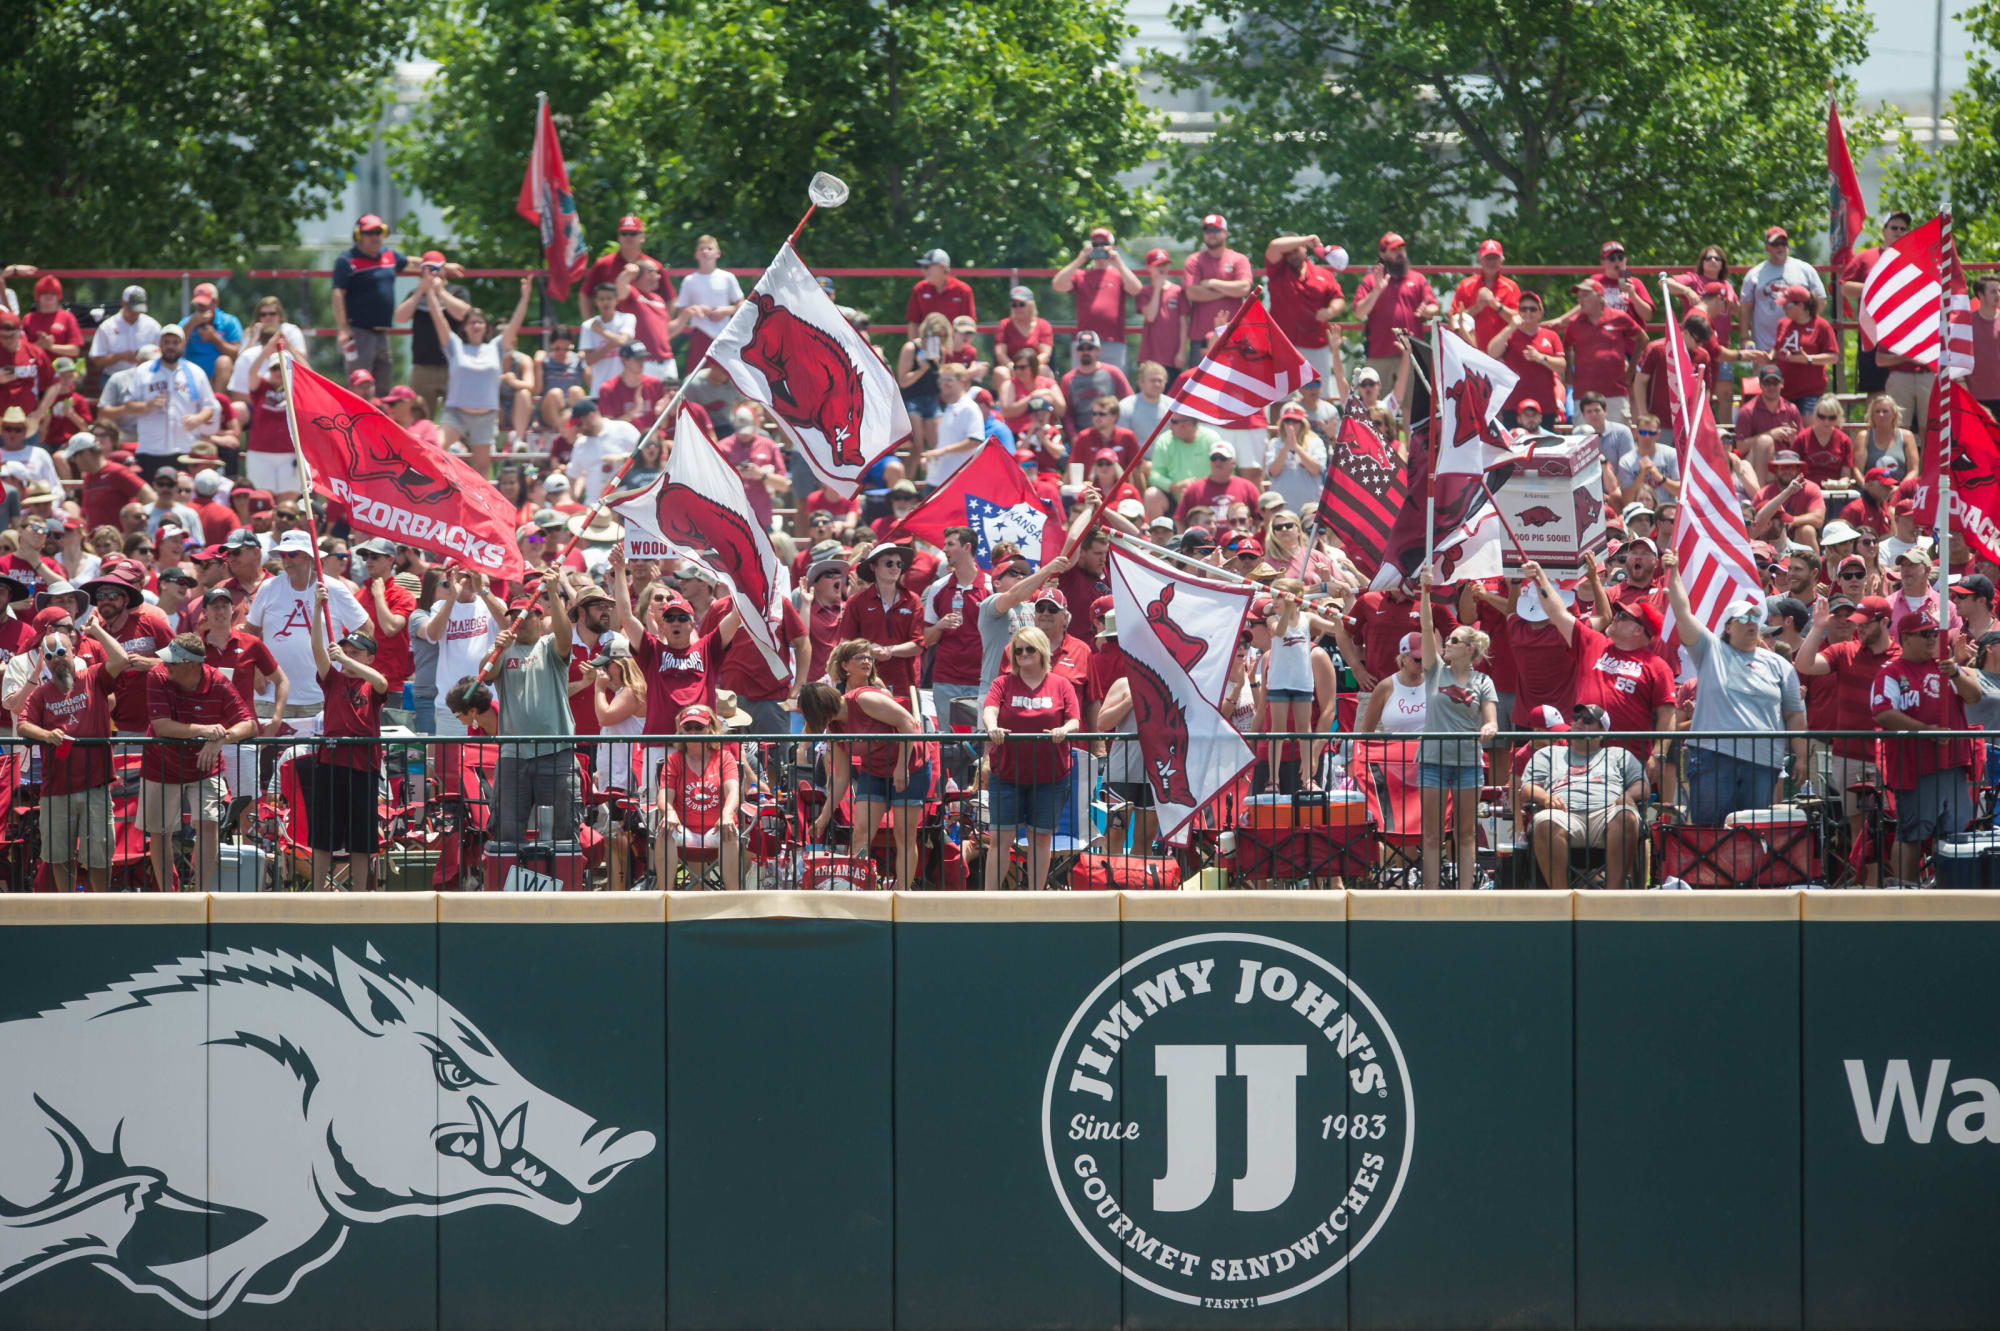 Look: Arkansas baseball fan acting totally normally has a raccoon in the stands